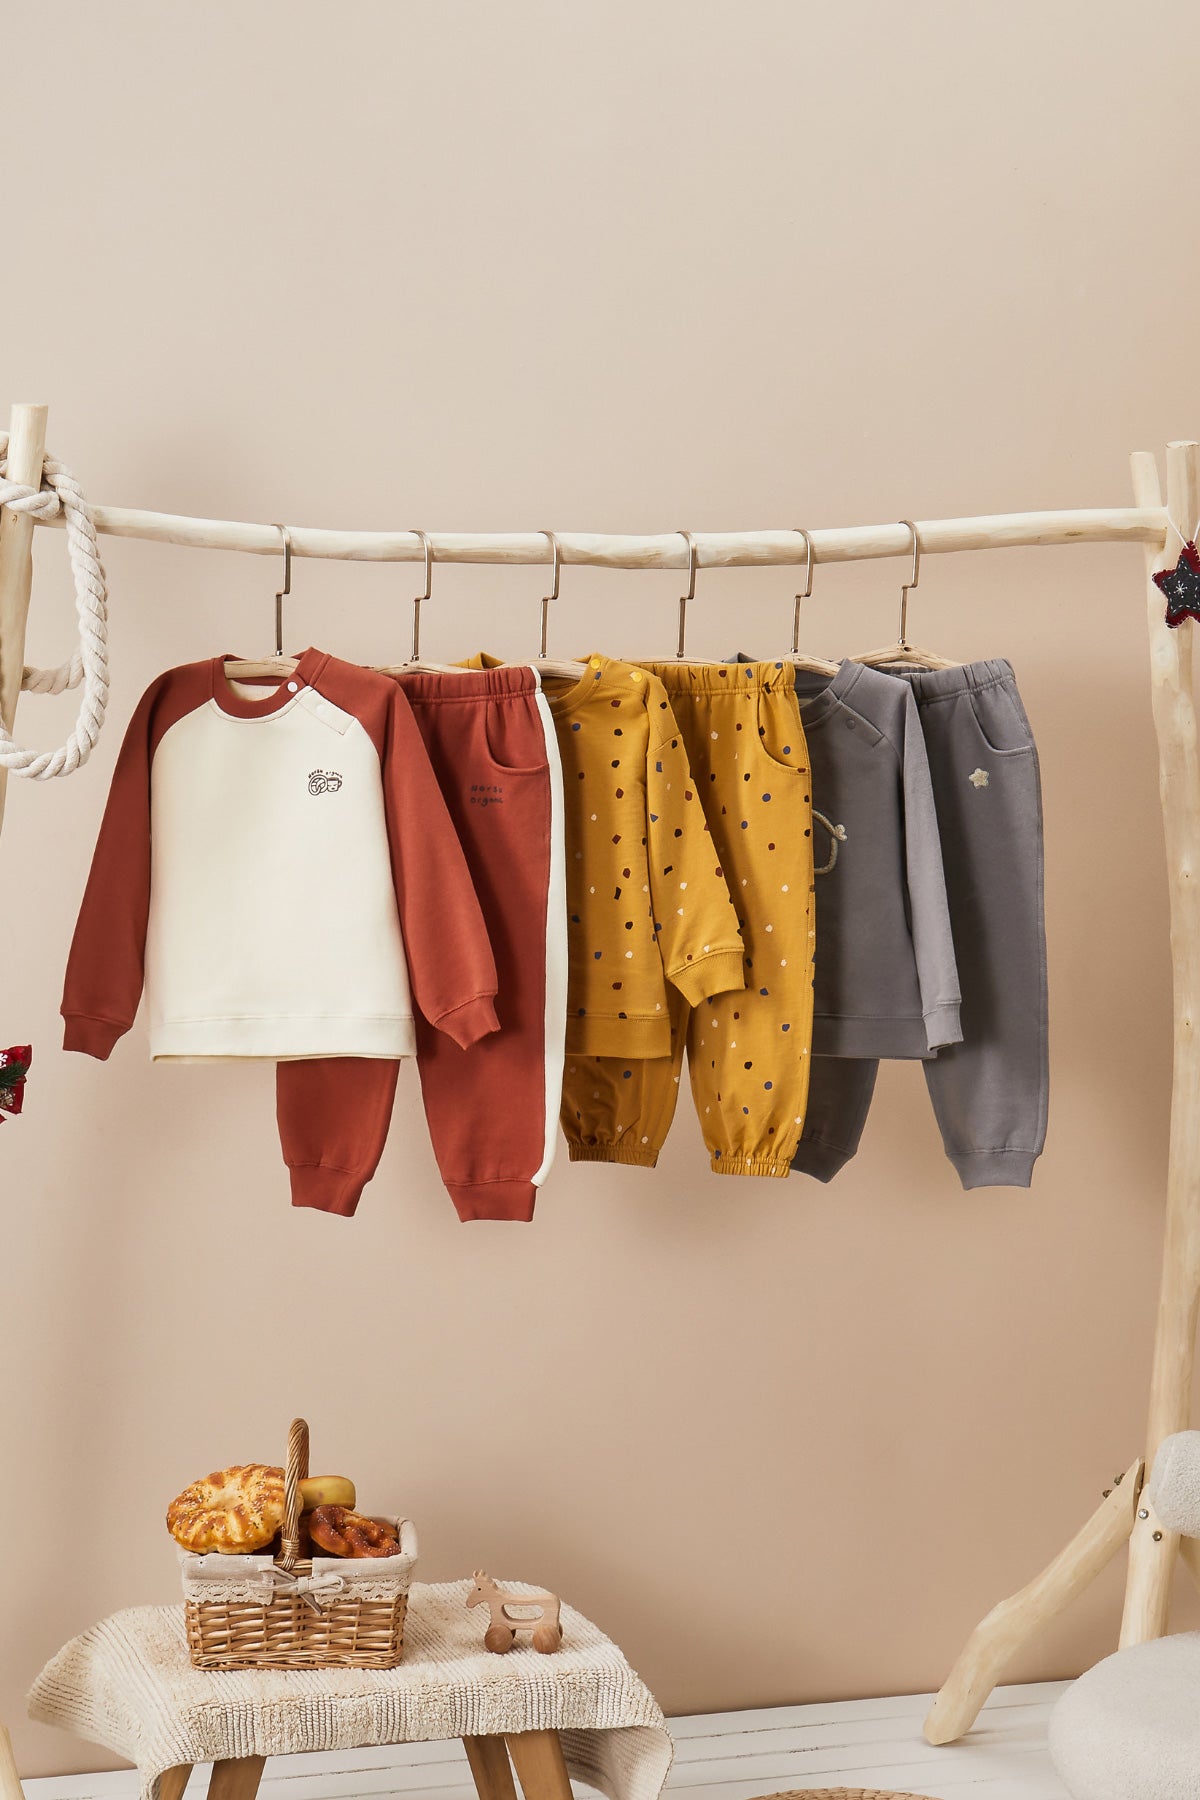 Organic Kids toddler Baby Clothes. Cool Kidswear.Timeless Design, Never go out of day -Norsu Organic